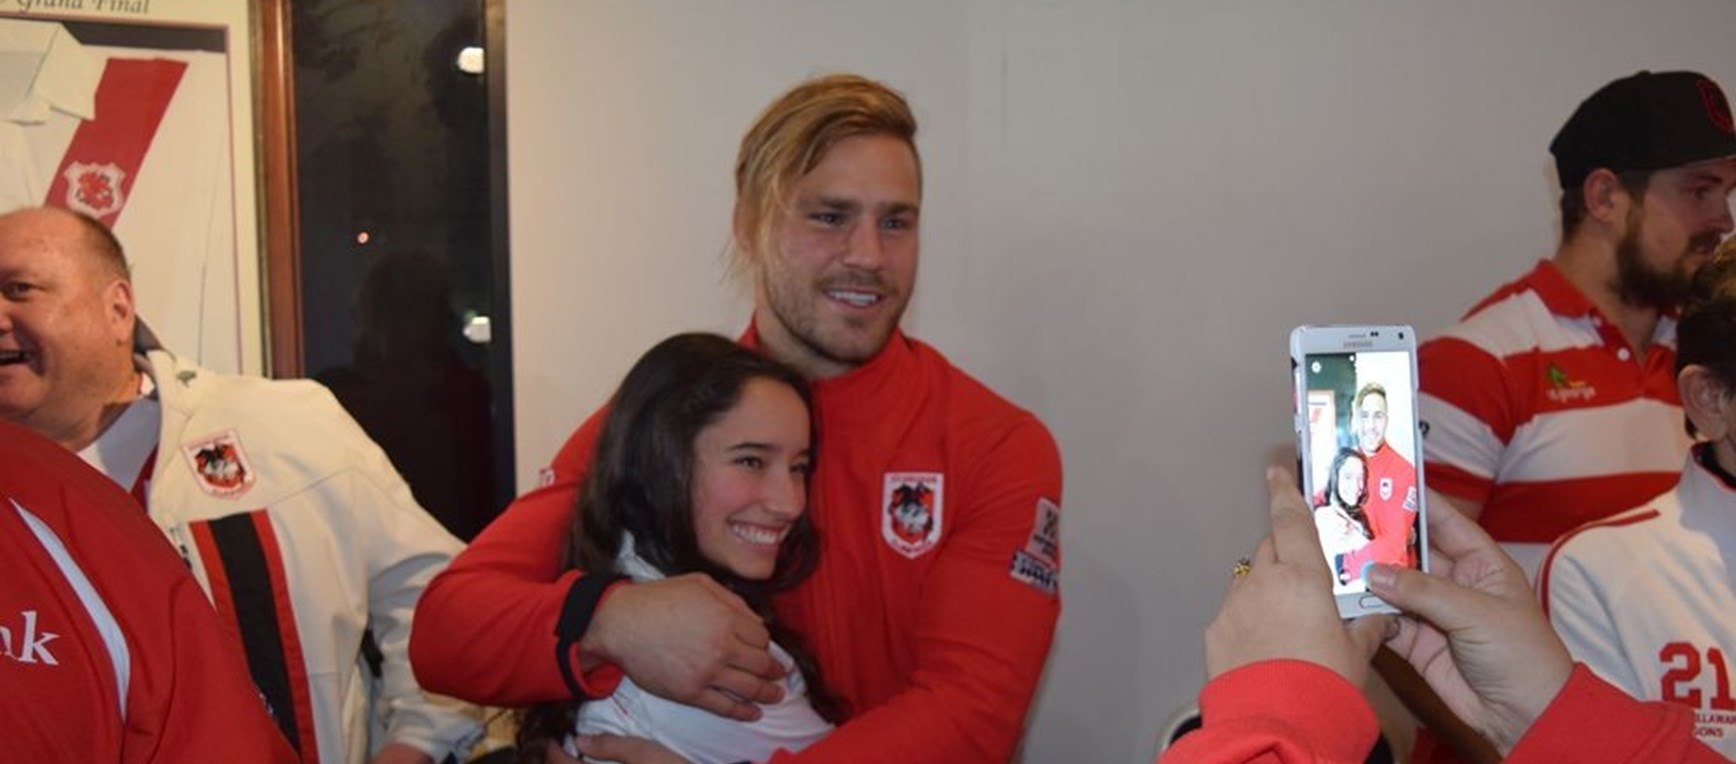 Gallery: 10 Year Red V Member Loyalty Event